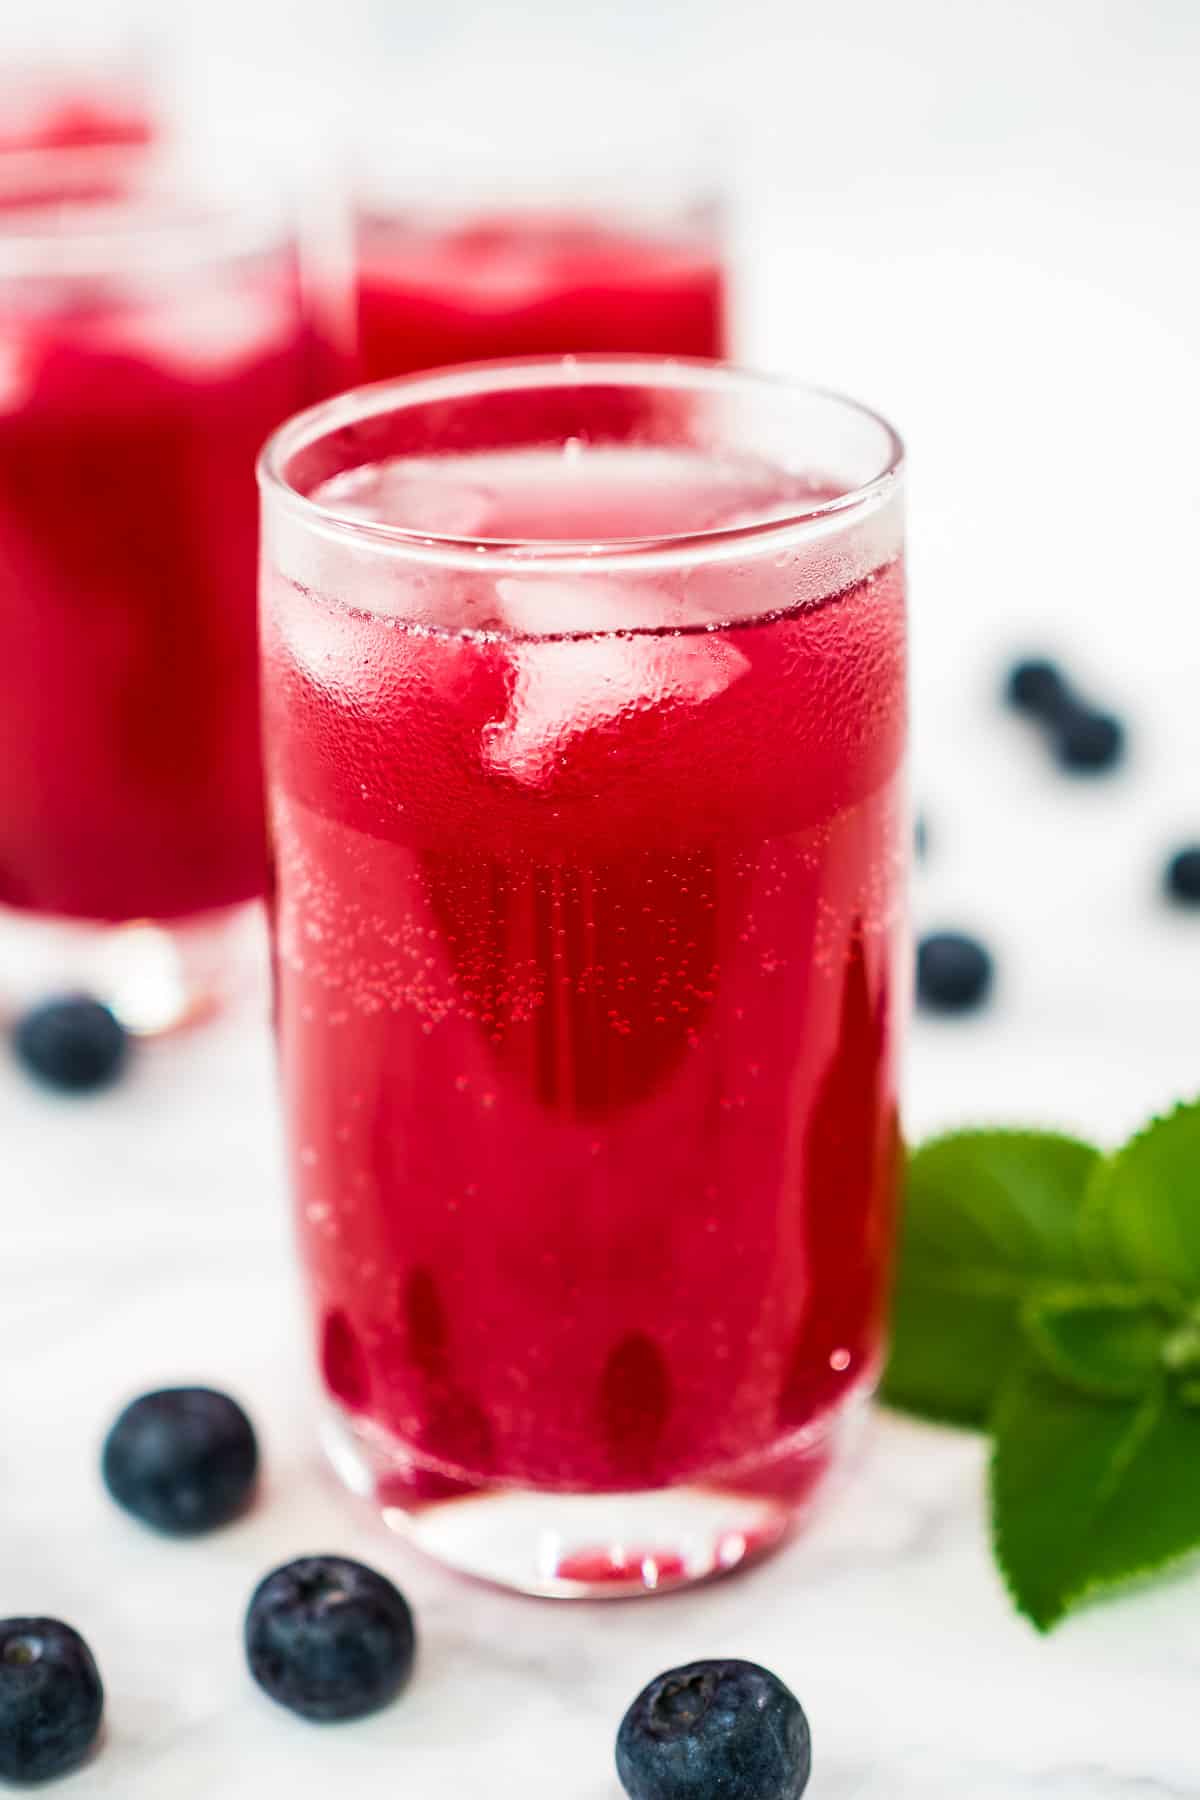 Iced blueberry soda drink in a glass